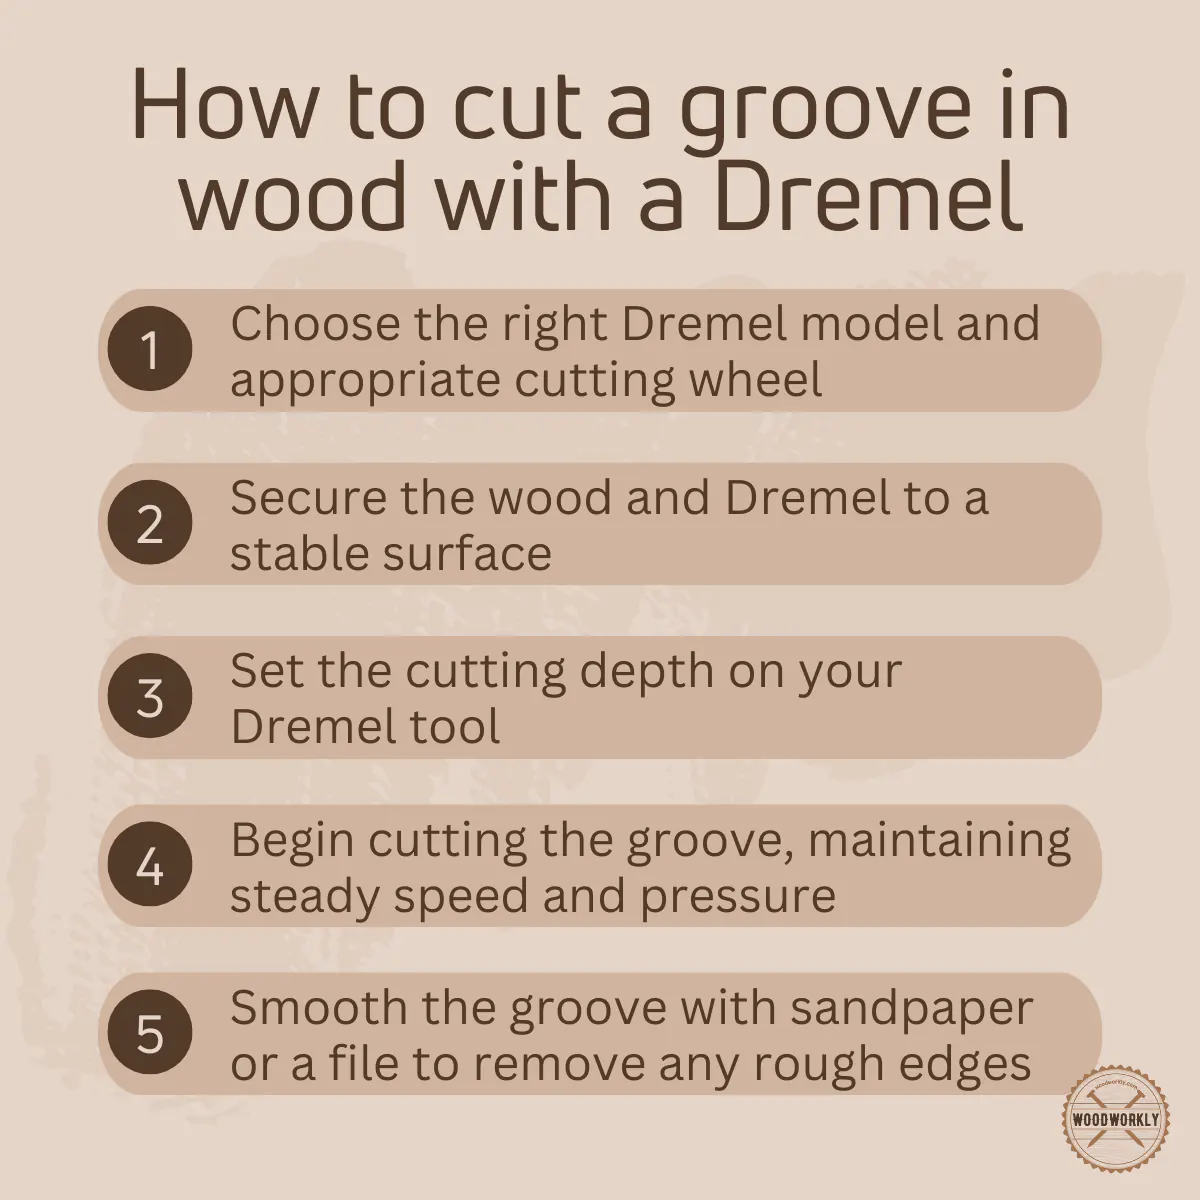 How to cut a groove in wood with a Dremel